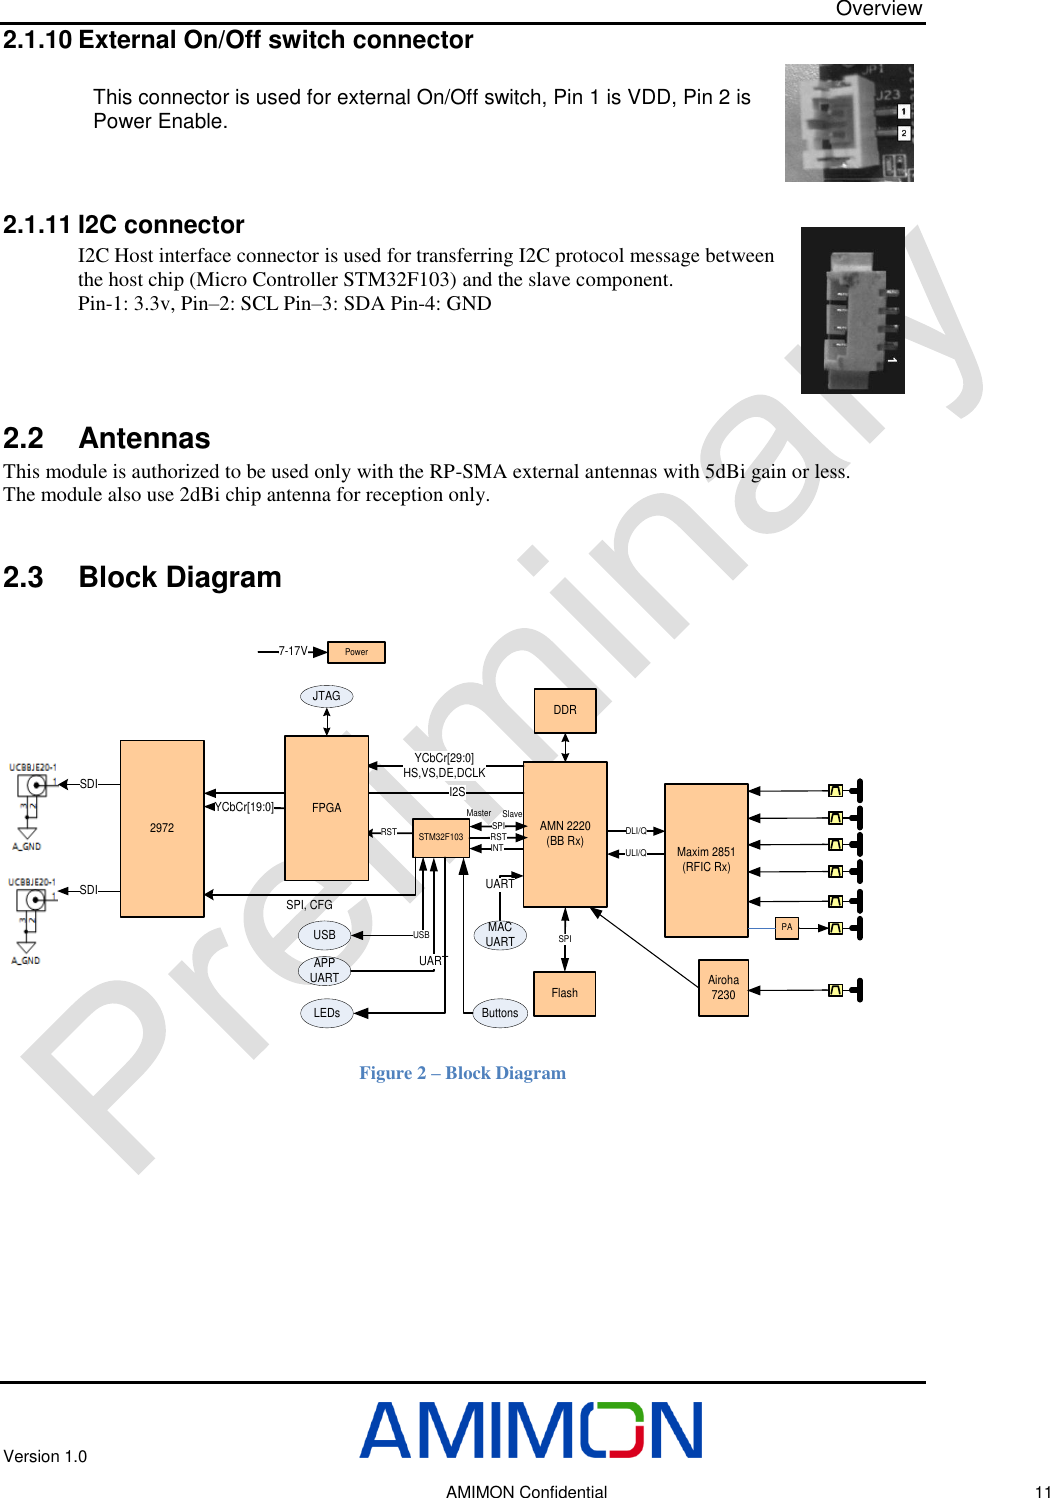 Overview Version 1.0     AMIMON Confidential    11 2.1.10 External On/Off switch connector This connector is used for external On/Off switch, Pin 1 is VDD, Pin 2 is Power Enable.      2.1.11 I2C connector I2C Host interface connector is used for transferring I2C protocol message between the host chip (Micro Controller STM32F103) and the slave component. Pin-1: 3.3v, Pin–2: SCL Pin–3: SDA Pin-4: GND    2.2 Antennas This module is authorized to be used only with the RP-SMA external antennas with 5dBi gain or less. The module also use 2dBi chip antenna for reception only.  2.3 Block Diagram   Figure 2 – Block Diagram AMN 2220 (BB Rx)FlashSPIMaxim 2851(RFIC Rx)DLI/QULI/QPADDRAiroha 7230USBPower7-17VYCbCr[29:0]HS,VS,DE,DCLKUARTAPP UARTI2SMAC UARTUSBSTM32F103 UARTSPIRST RSTINTMaster SlaveFPGA2972YCbCr[19:0]SDISPI, CFGJTAGSDIButtonsLEDs